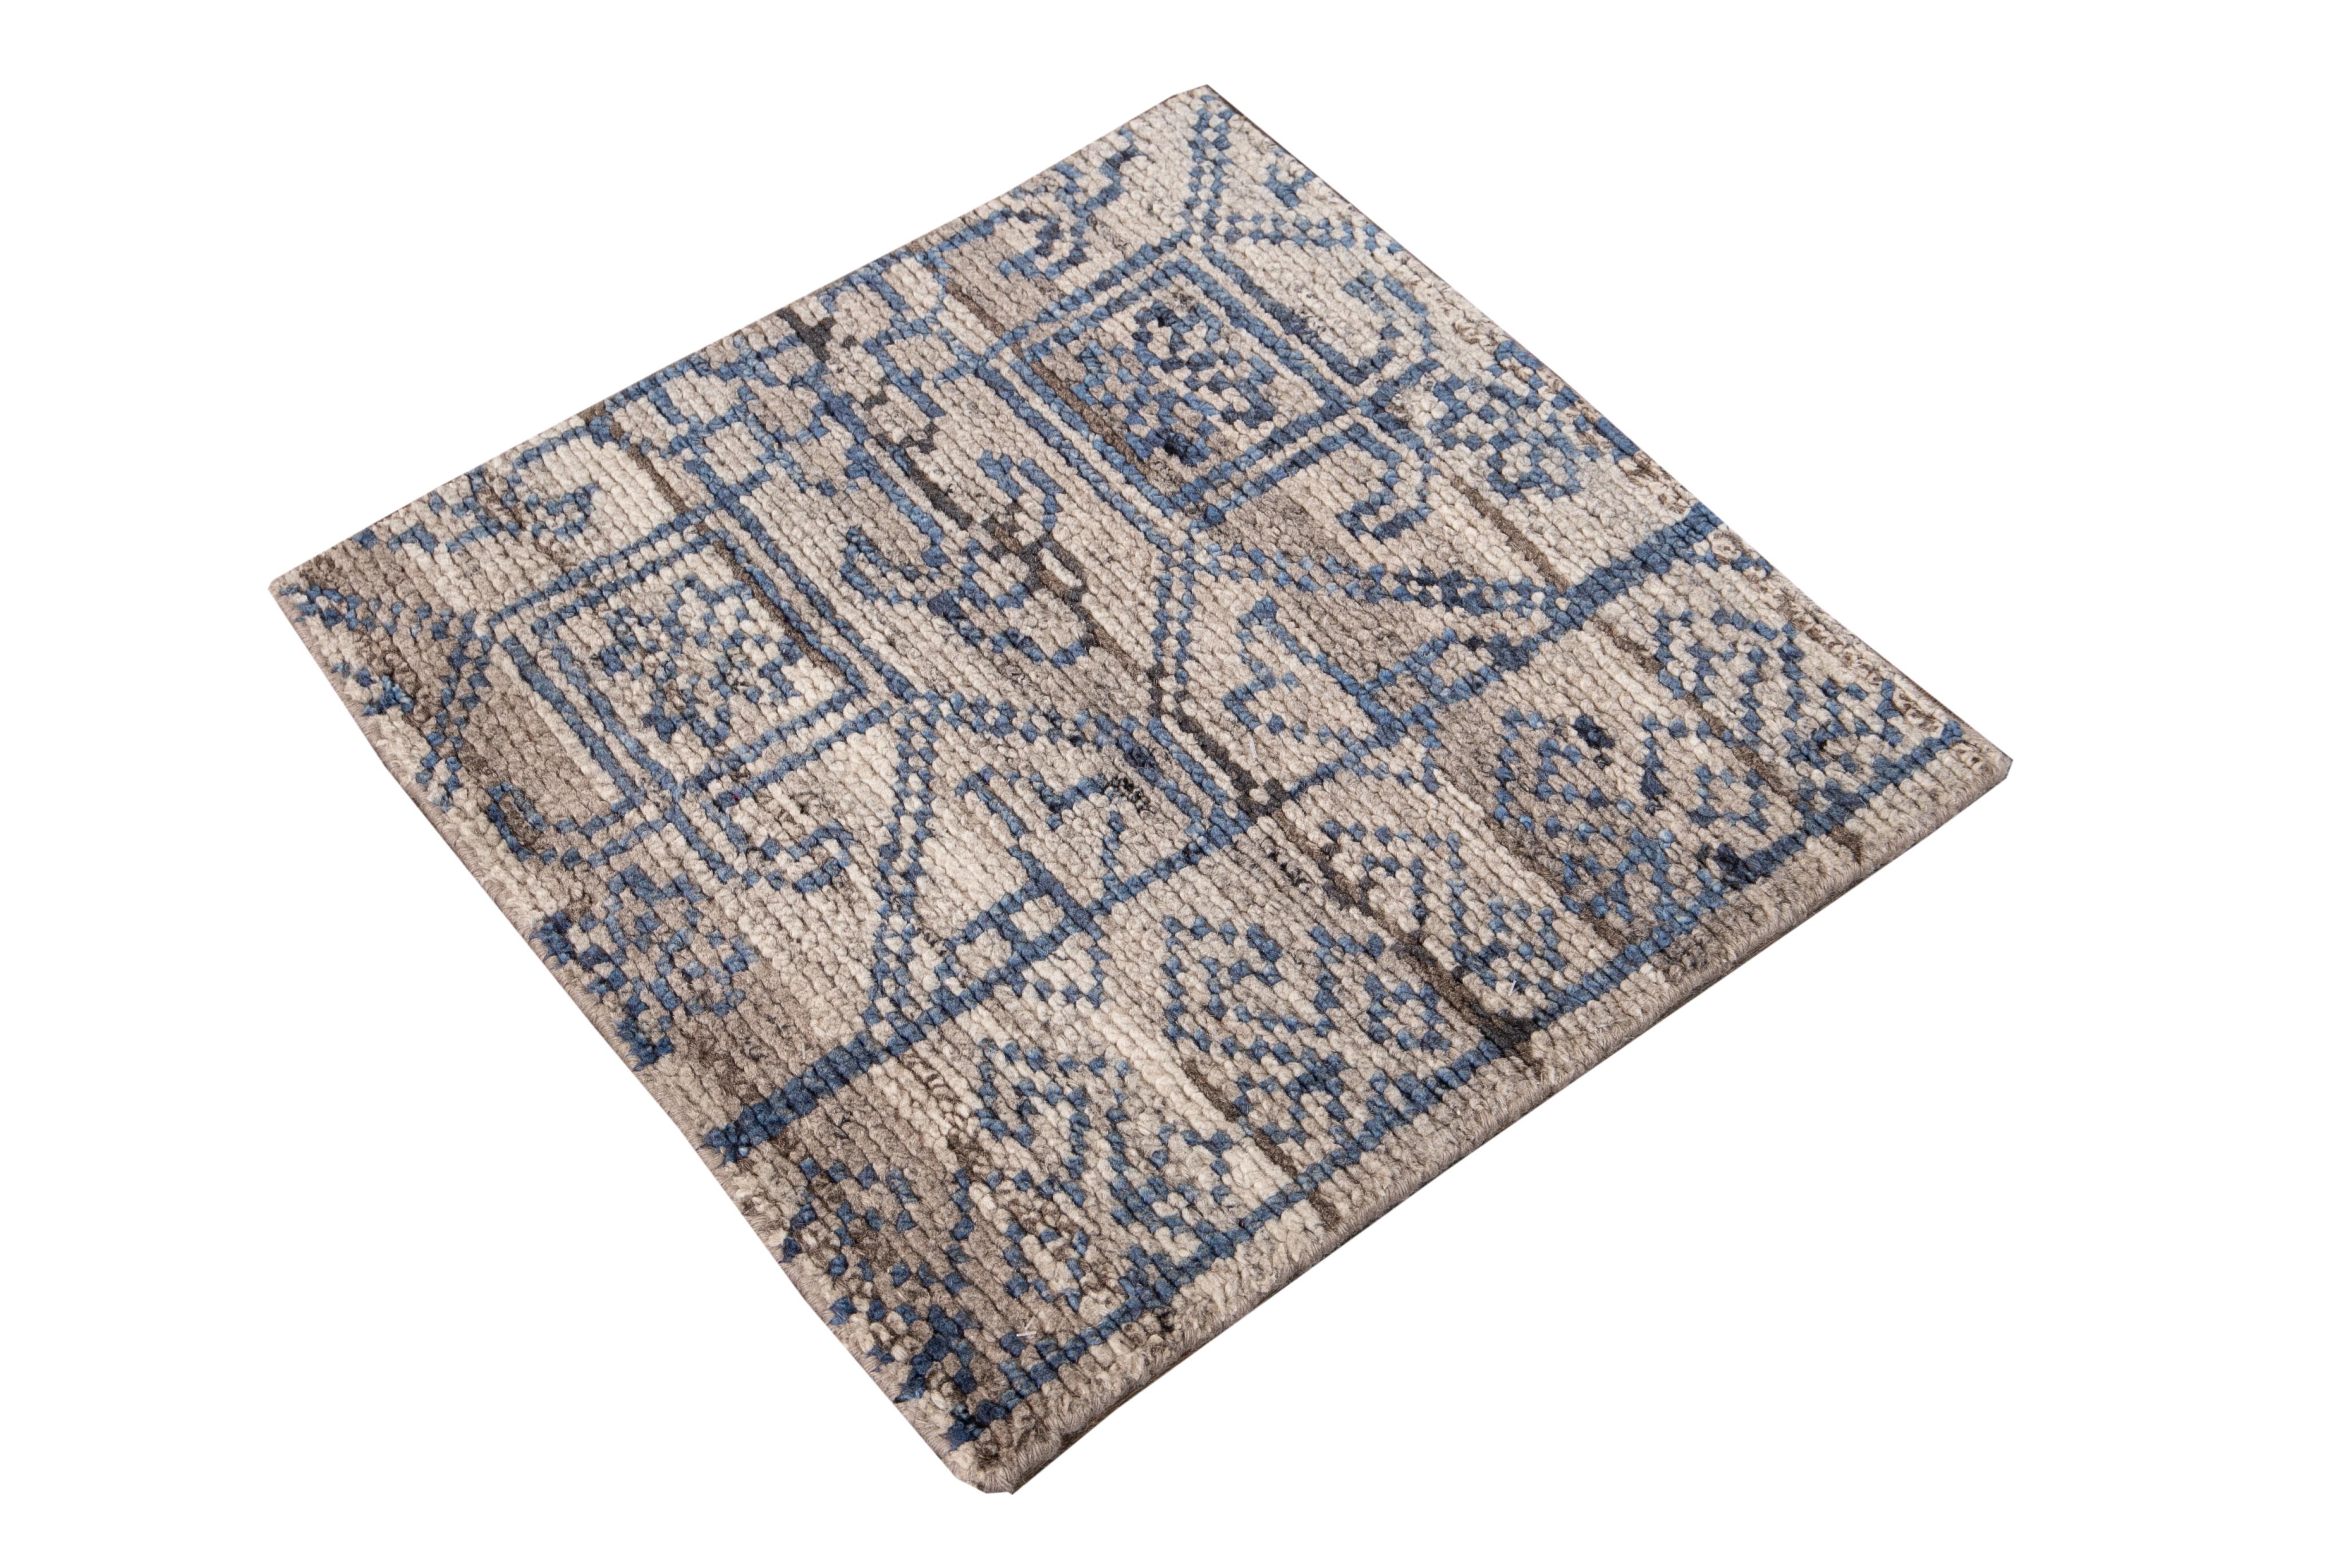 Hand knotted 100% wool custom rug. Custom sizes and colors made-to-order.

Collection: Wilton
Material: Wool
Lead time: Approximate 12-15 weeks depending on size
Available colors: As shown.

The price listed is for an 8' x 10' rug.